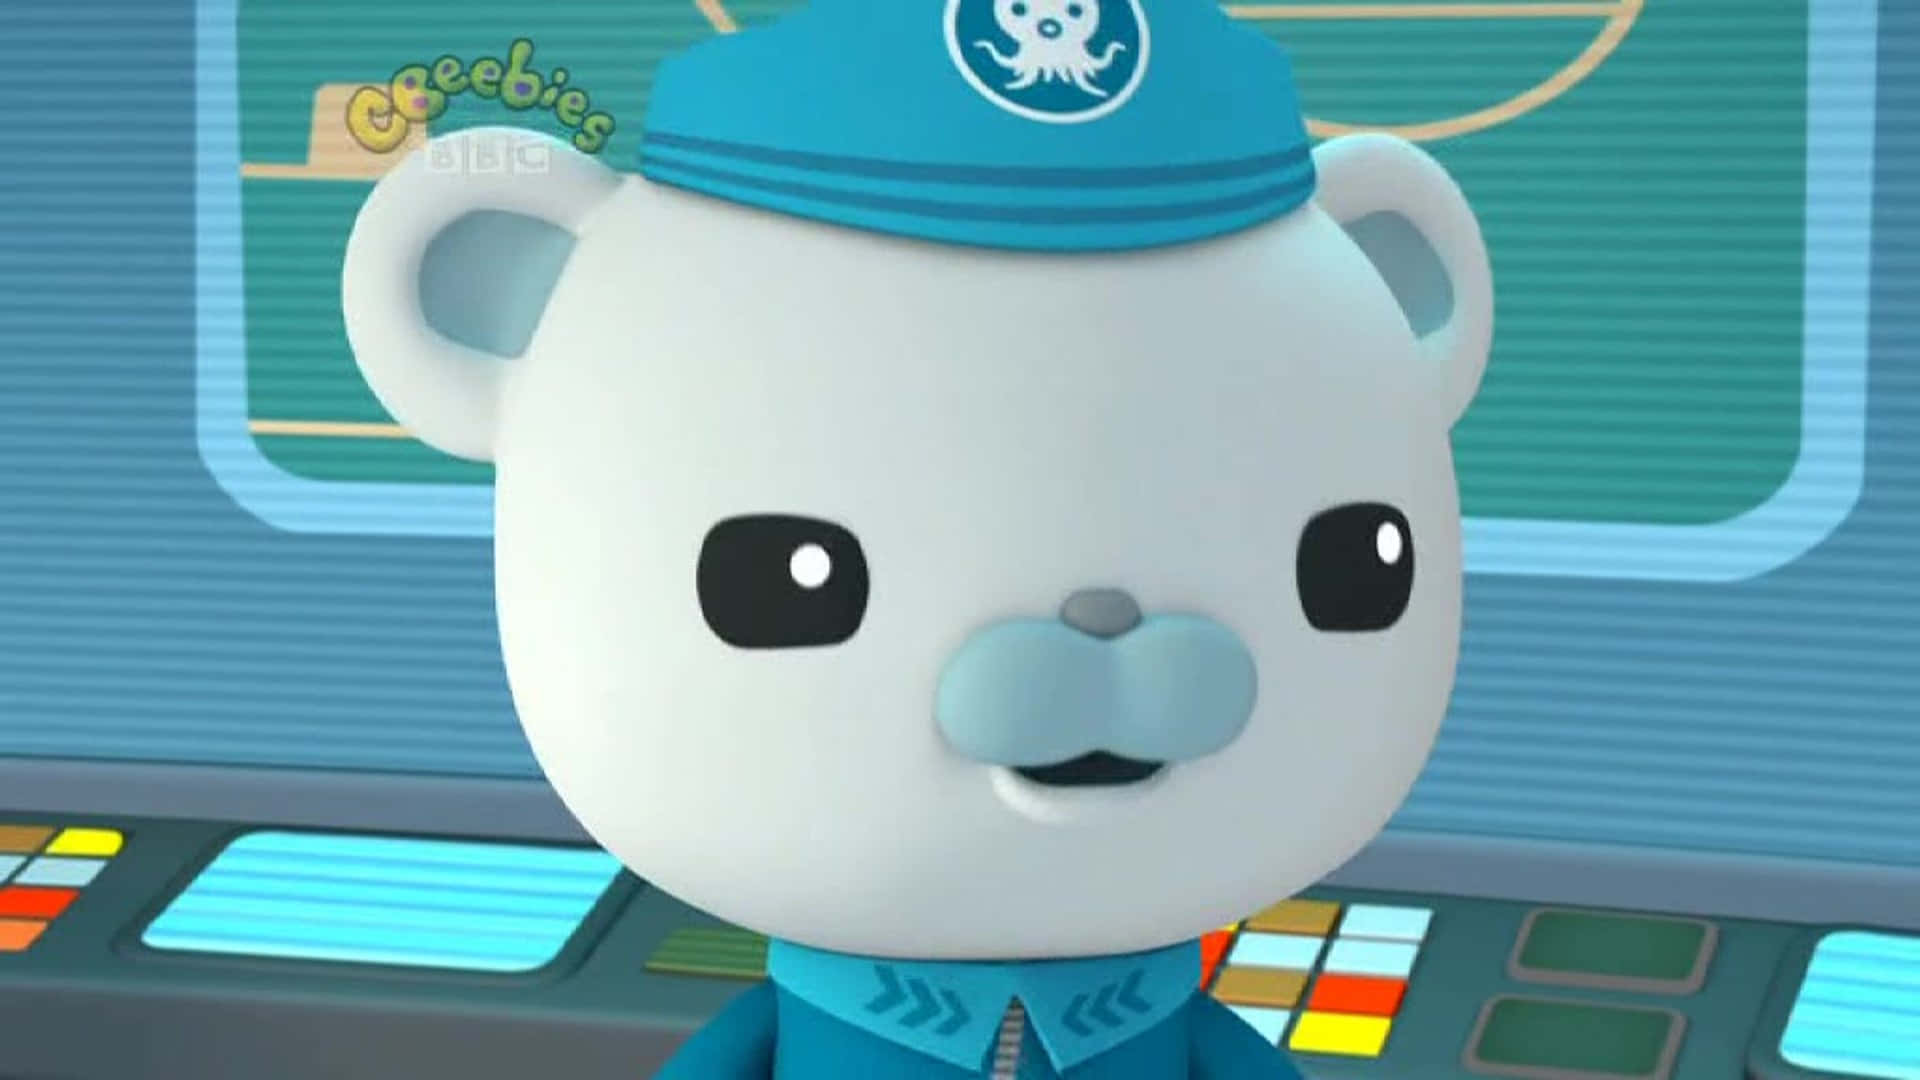 Explore the world with the Octonauts! Wallpaper